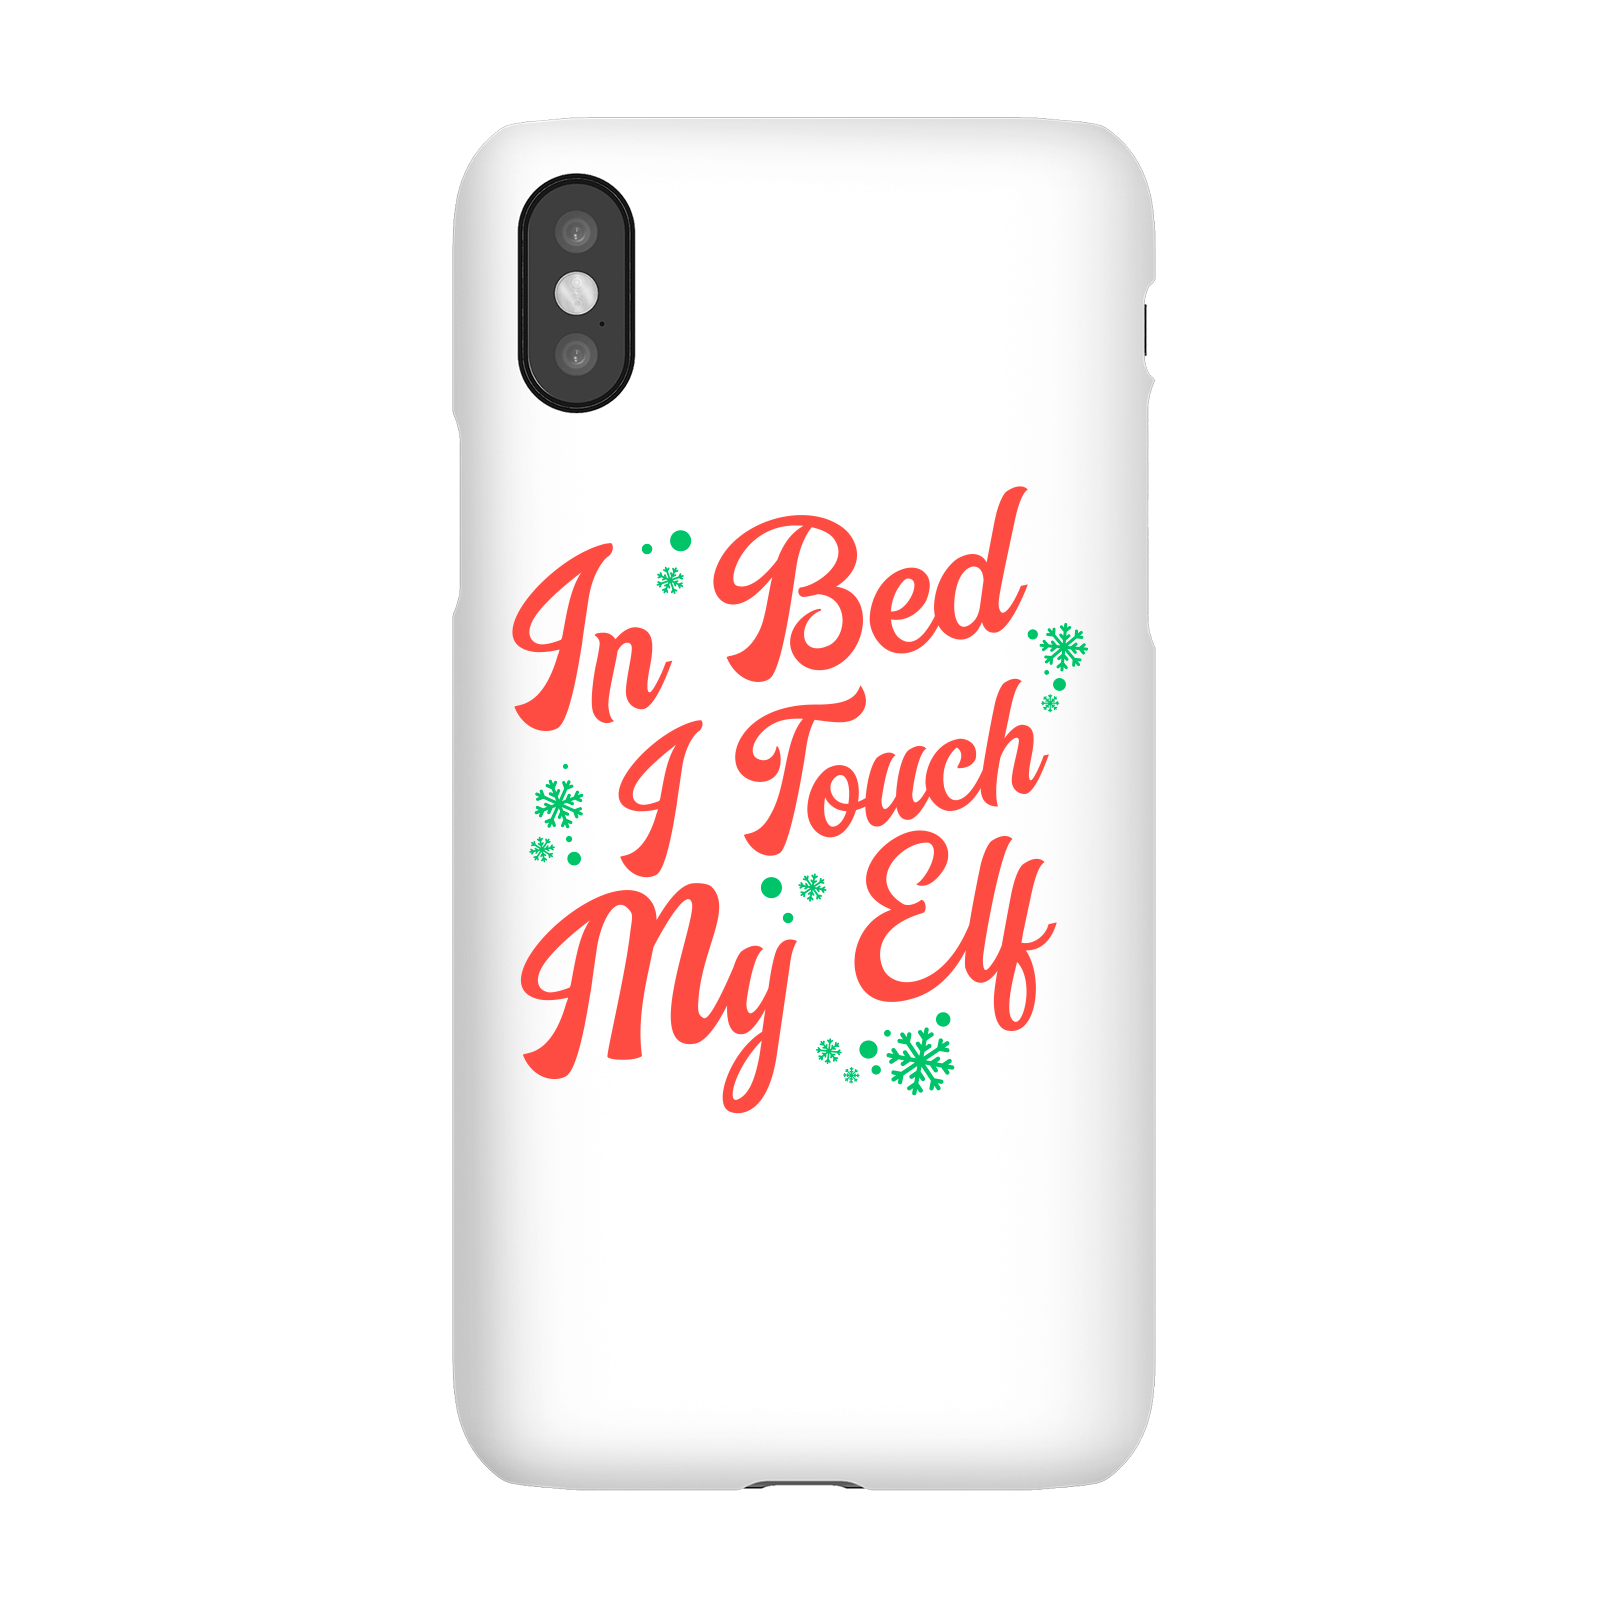 In Bed I Touch My Elf Phone Case for iPhone and Android - iPhone 5/5s - Snap Case - Matte